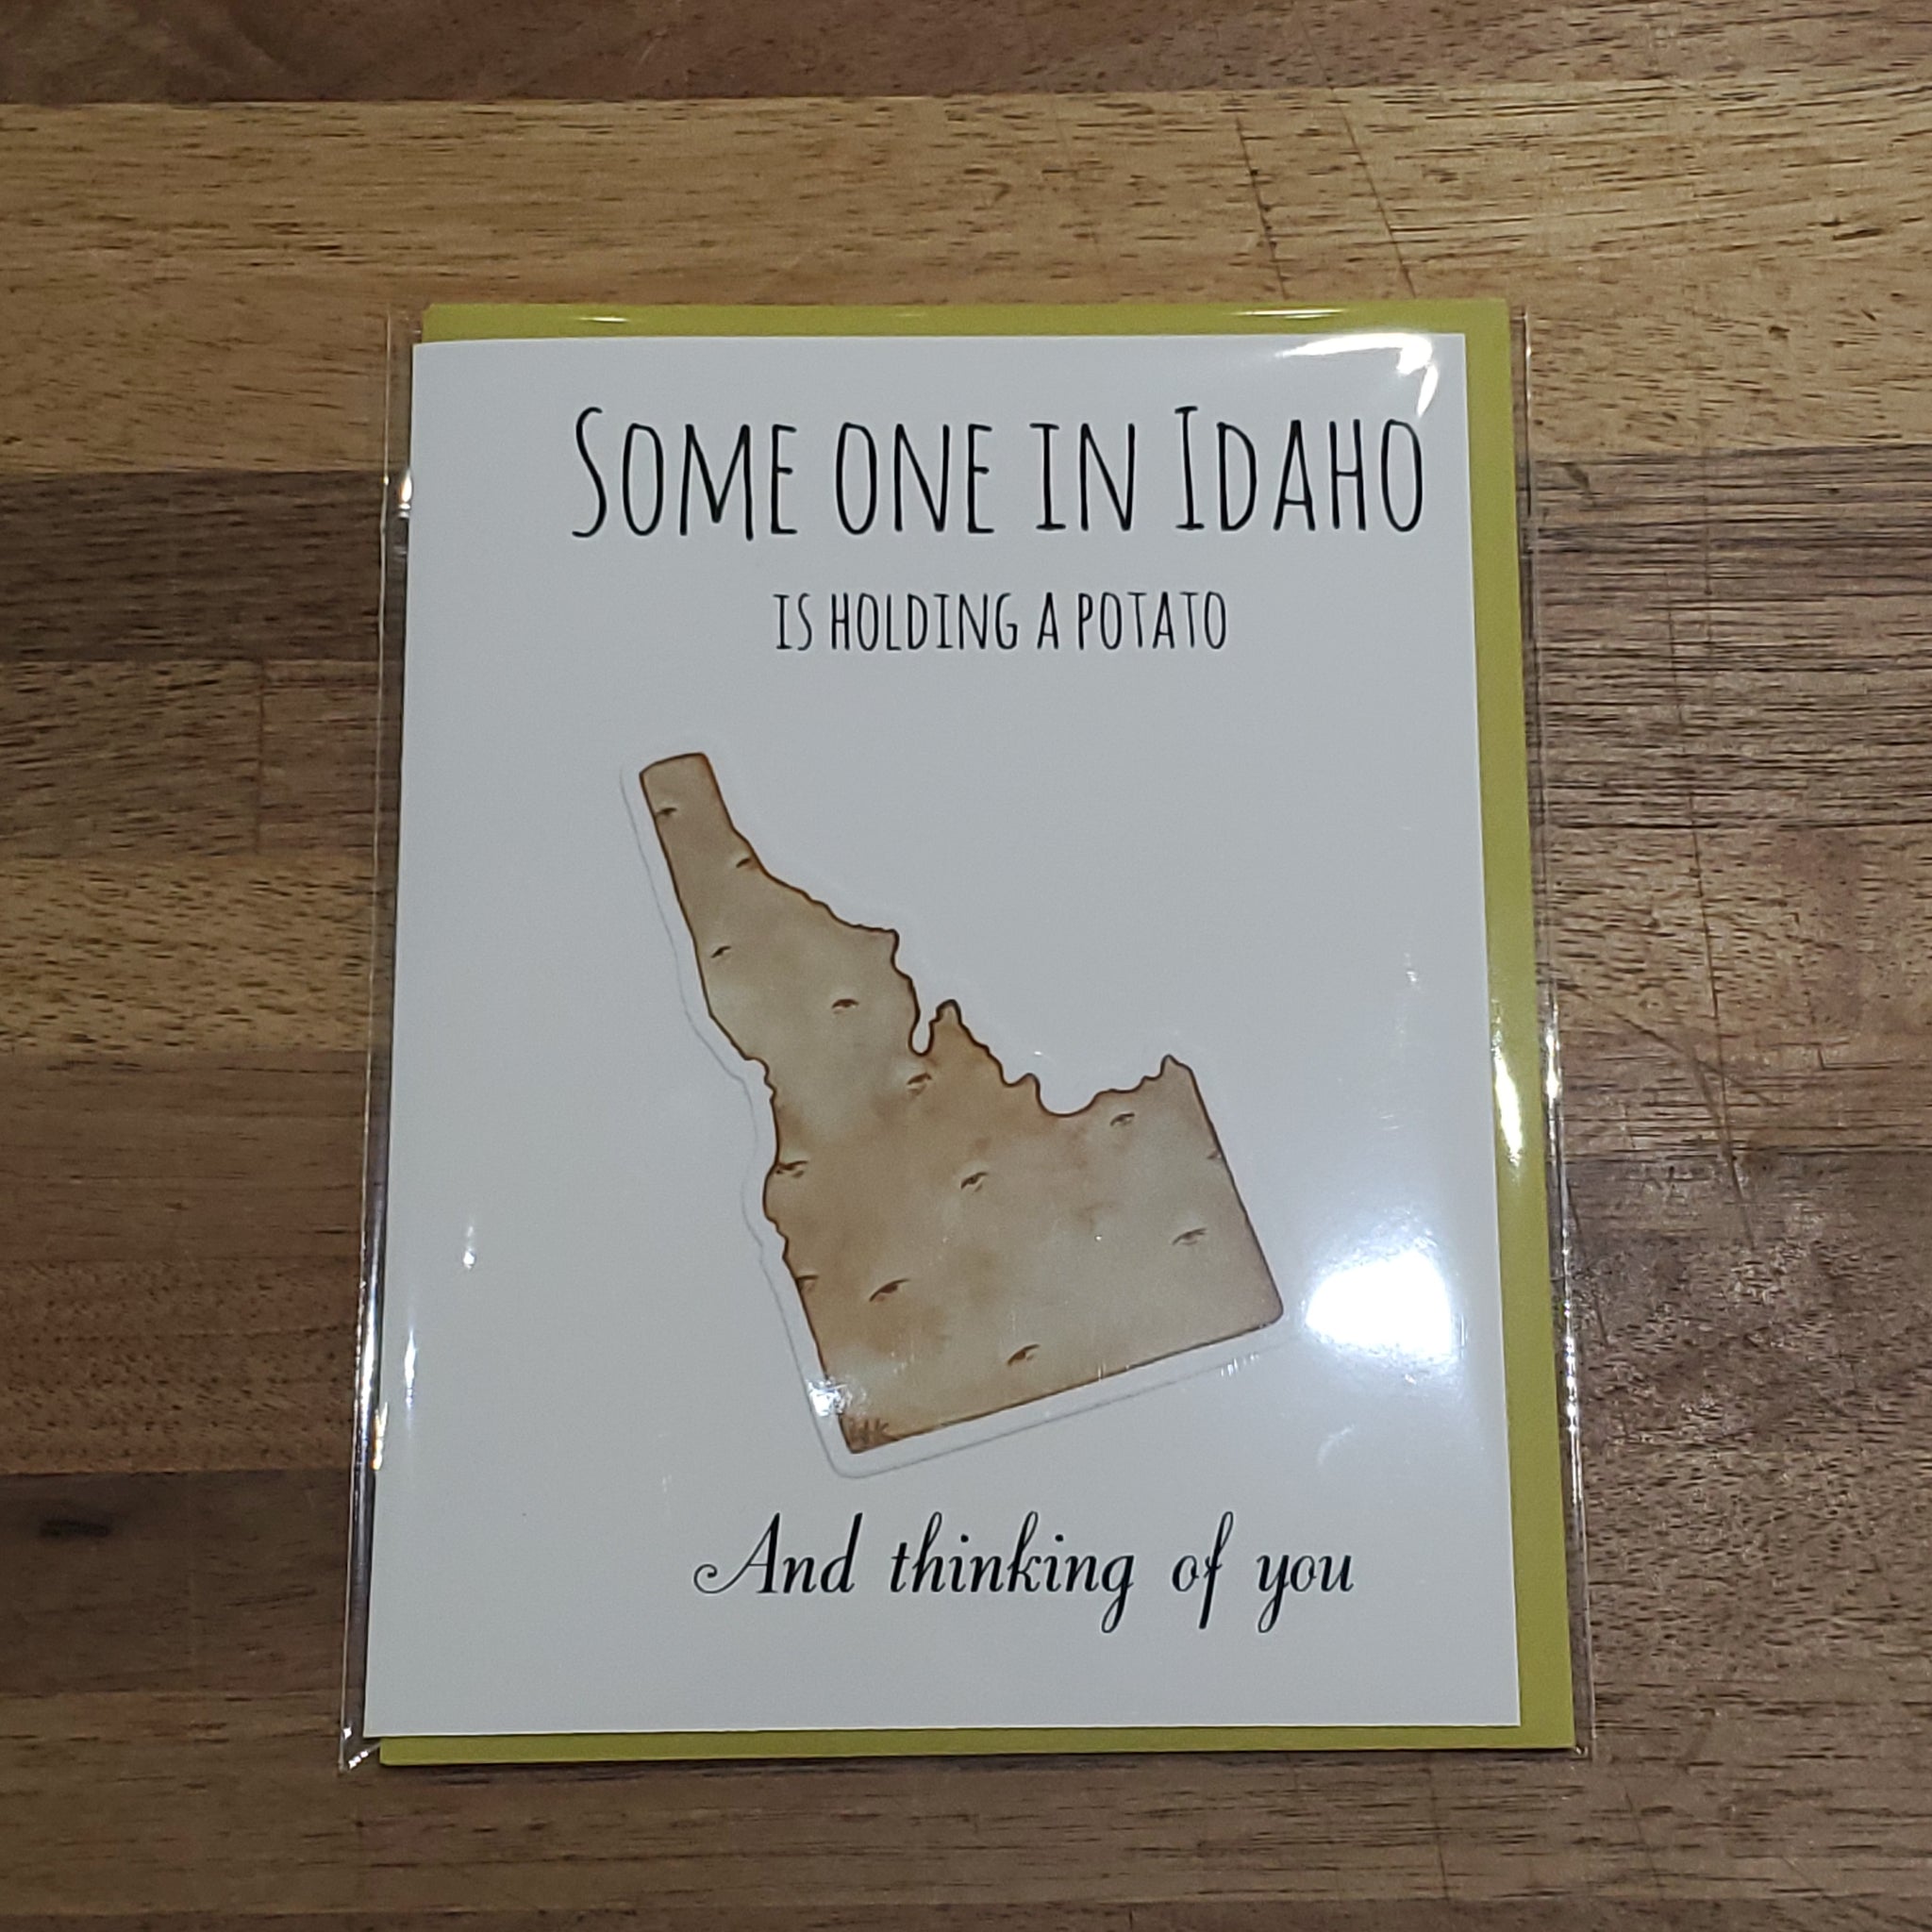 Lauren T Kistner Arts Card + Sticker "Someone in Idaho is holding a potato and thinking of you"